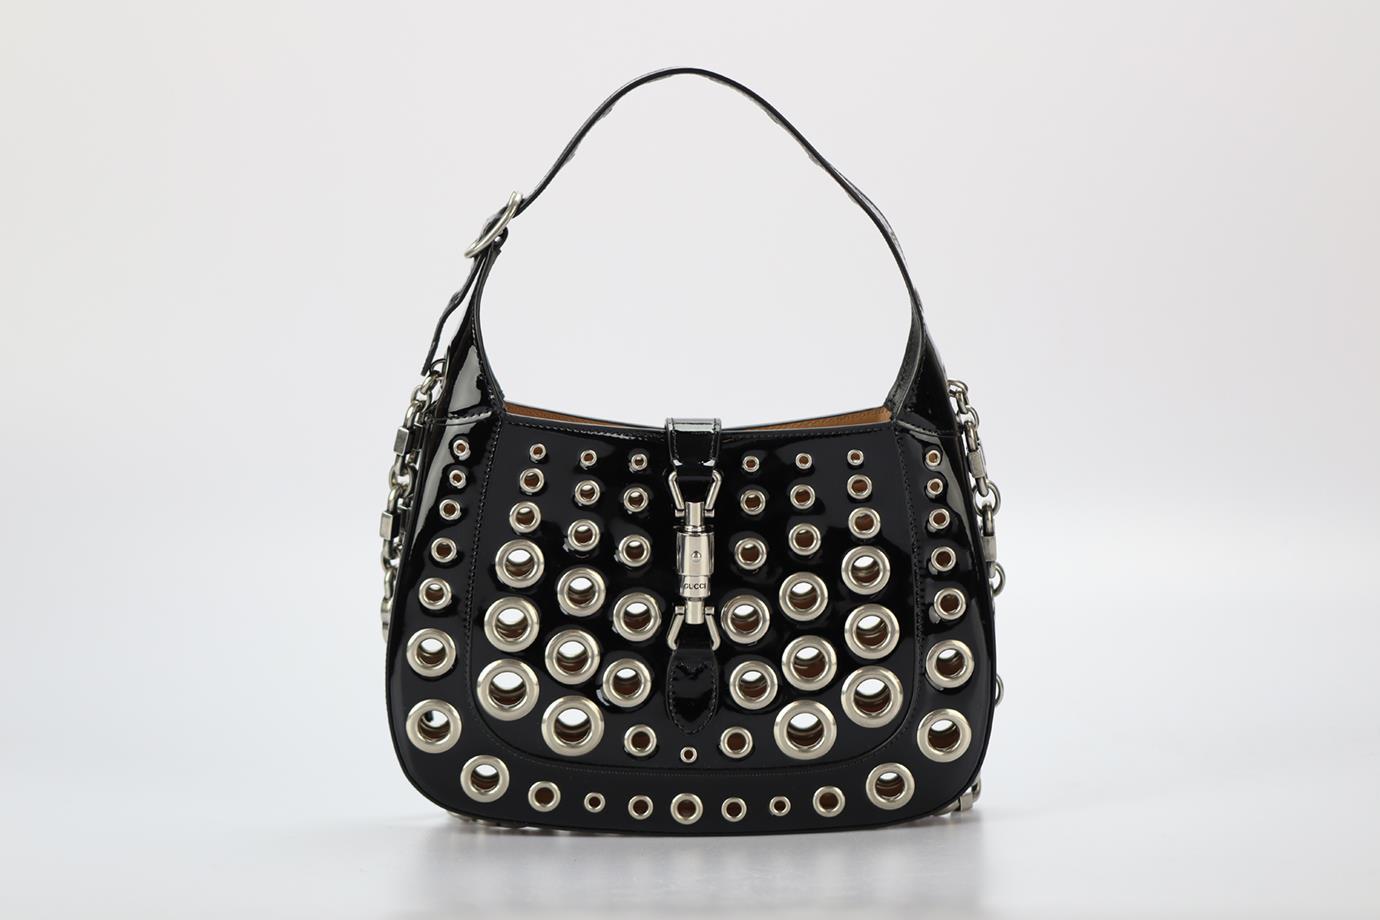 Gucci Ha Ha Ha Jackie 1961 Eyelet Embellished Patent Leather Shoulder Bag. Black. Clasp fastening - Front. Comes with - dustbag. Height: 13.8 in. Width: 11.1 in. Depth: 1.3 in. Handle drop: 6.6 in. Strap drop: 15 in. Condition: Used. Very good